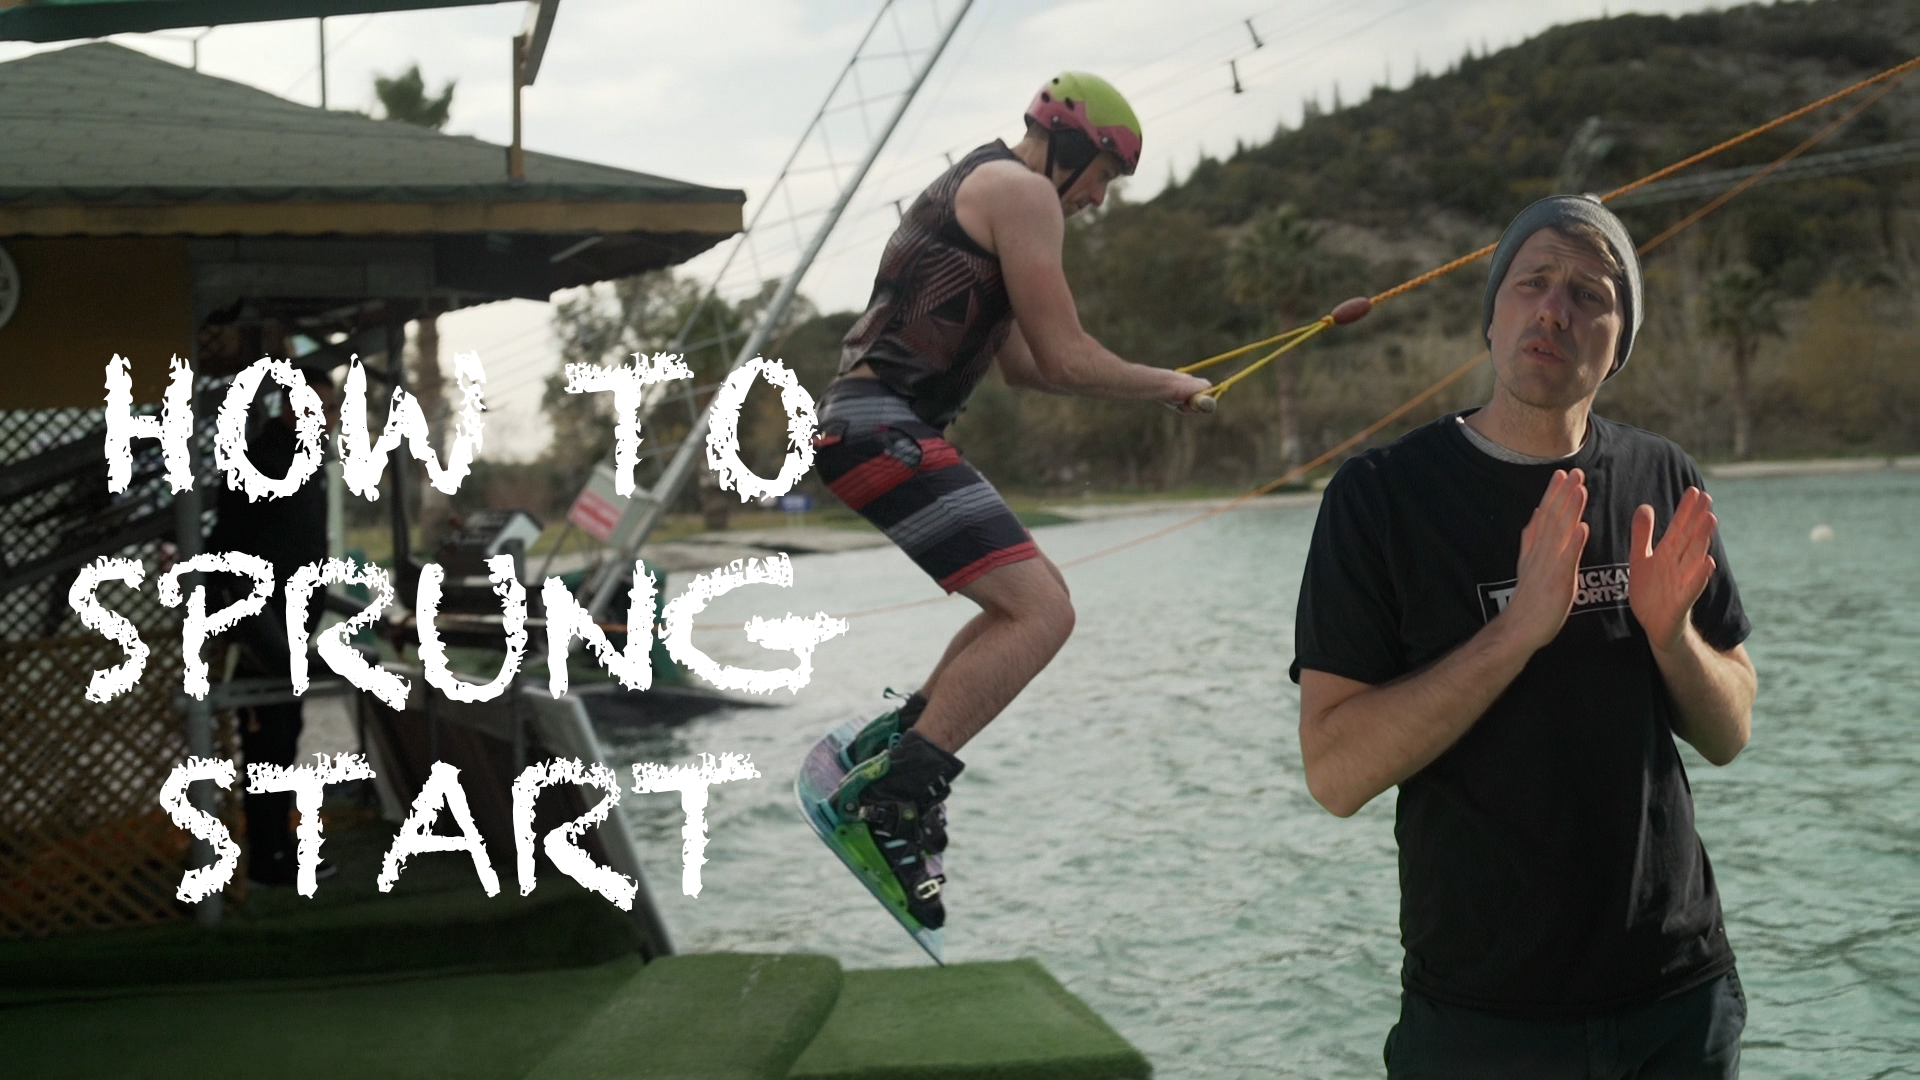 You are currently viewing How to Sprungstart (Wakeboarden)